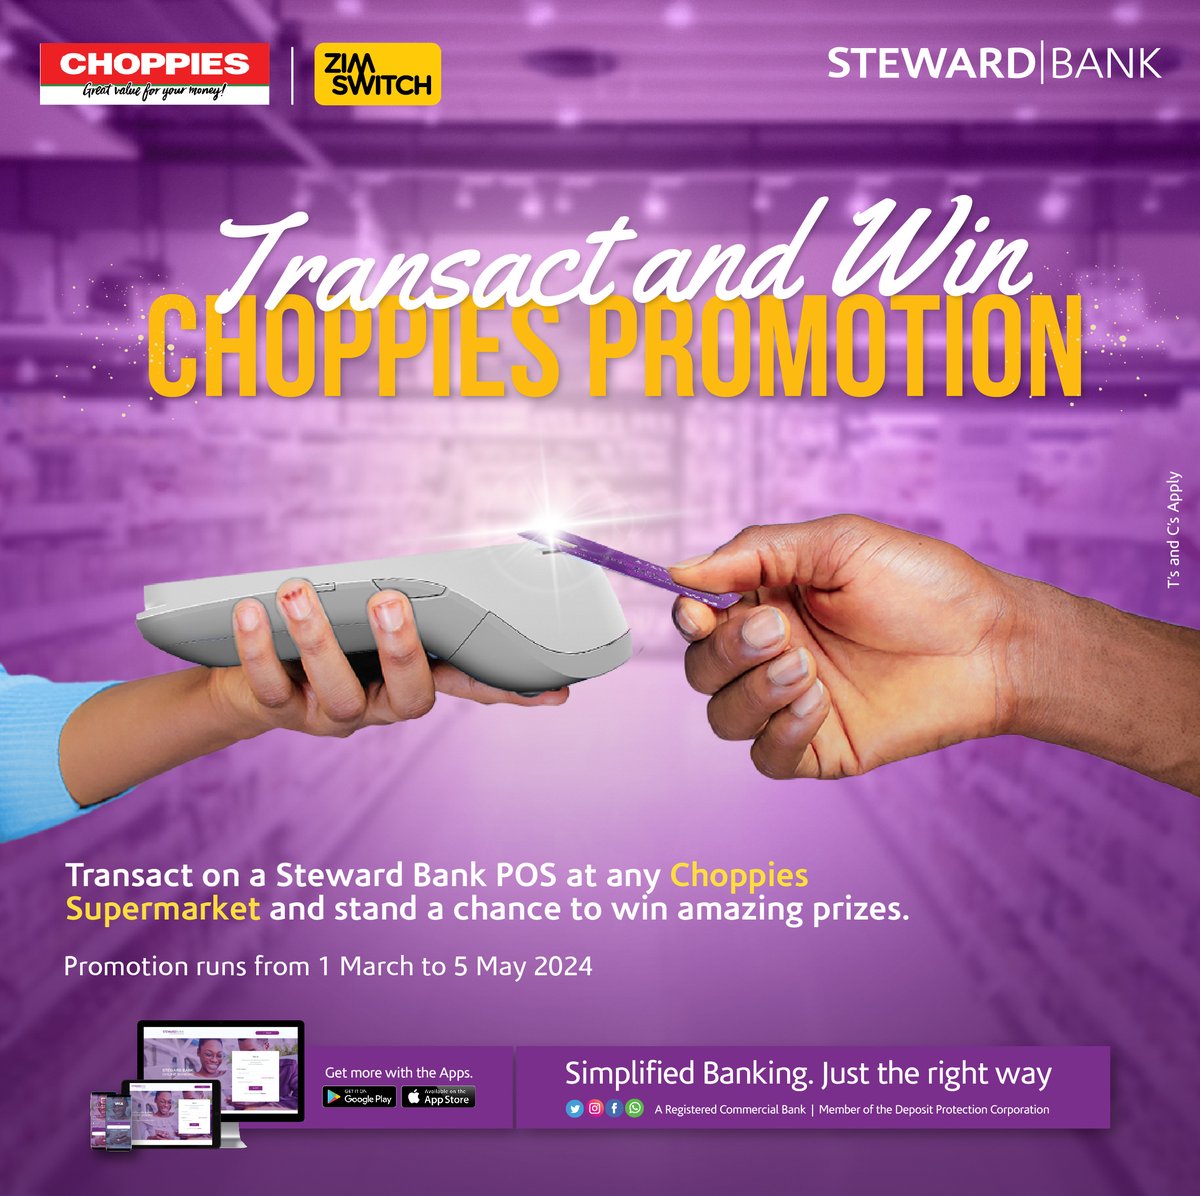 Transact and Win with Steward Bank and Choppies Zimbabwe! Simply transact on a Steward Bank POS machine at any Choppies Zimbabwe supermarket countrywide. 📷First Prize - 3KVA Solar System 📷Second Prize - 65 Inch Smart Curved TV 📷Third Prize - USD600 voucher Ts & Cs Apply